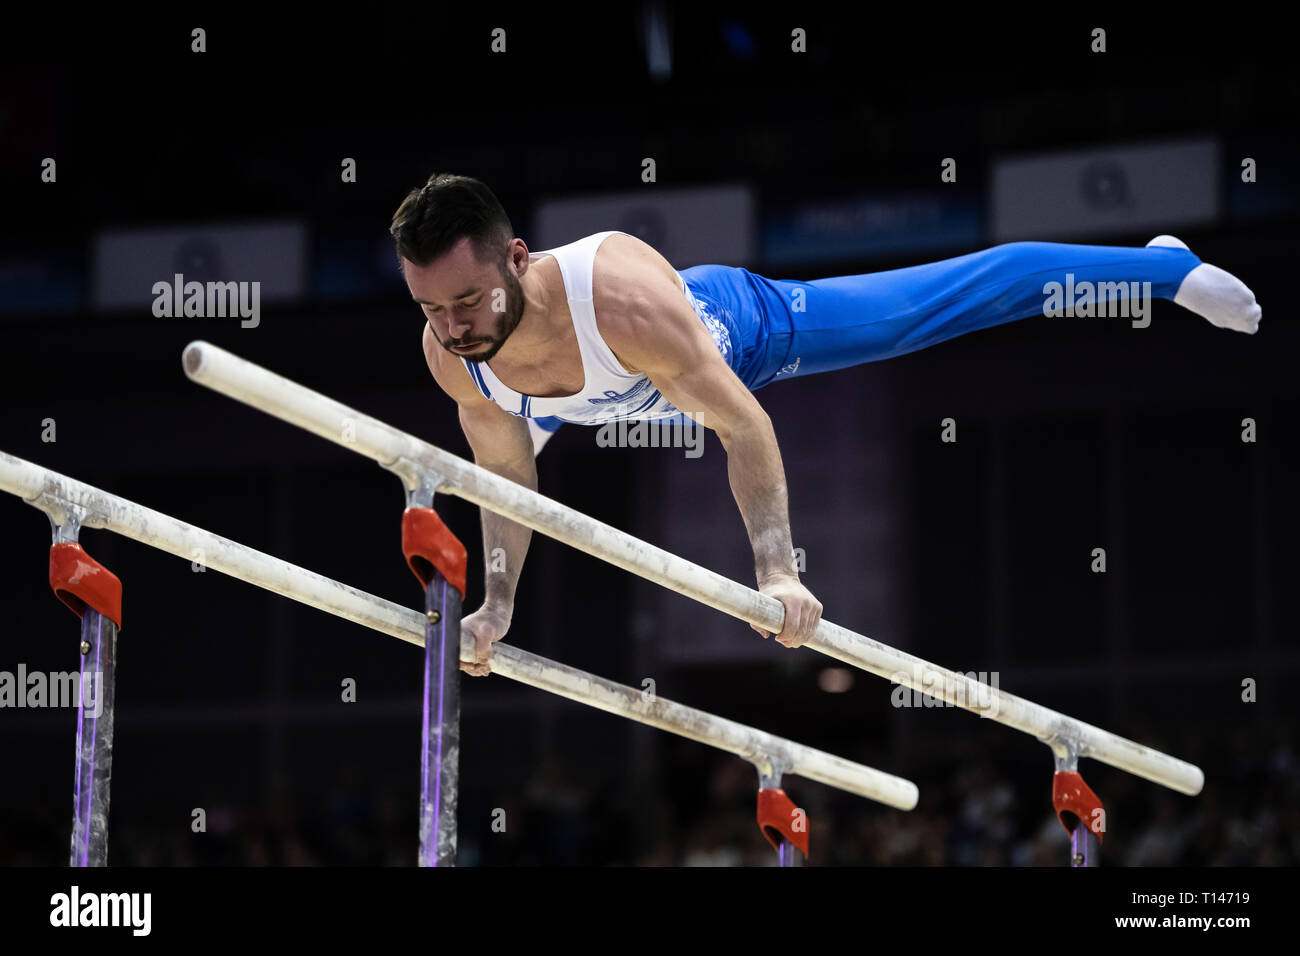 London, UK. 23rd March, 2019. James Hall performs on the Parallel Bars during the Matchroom Multisport presents the 2019 Superstars of Gymnastics at The O2 Arena on Saturday, 23 March 2019. LONDON ENGLAND. Credit: Taka G Wu/Alamy News Stock Photo